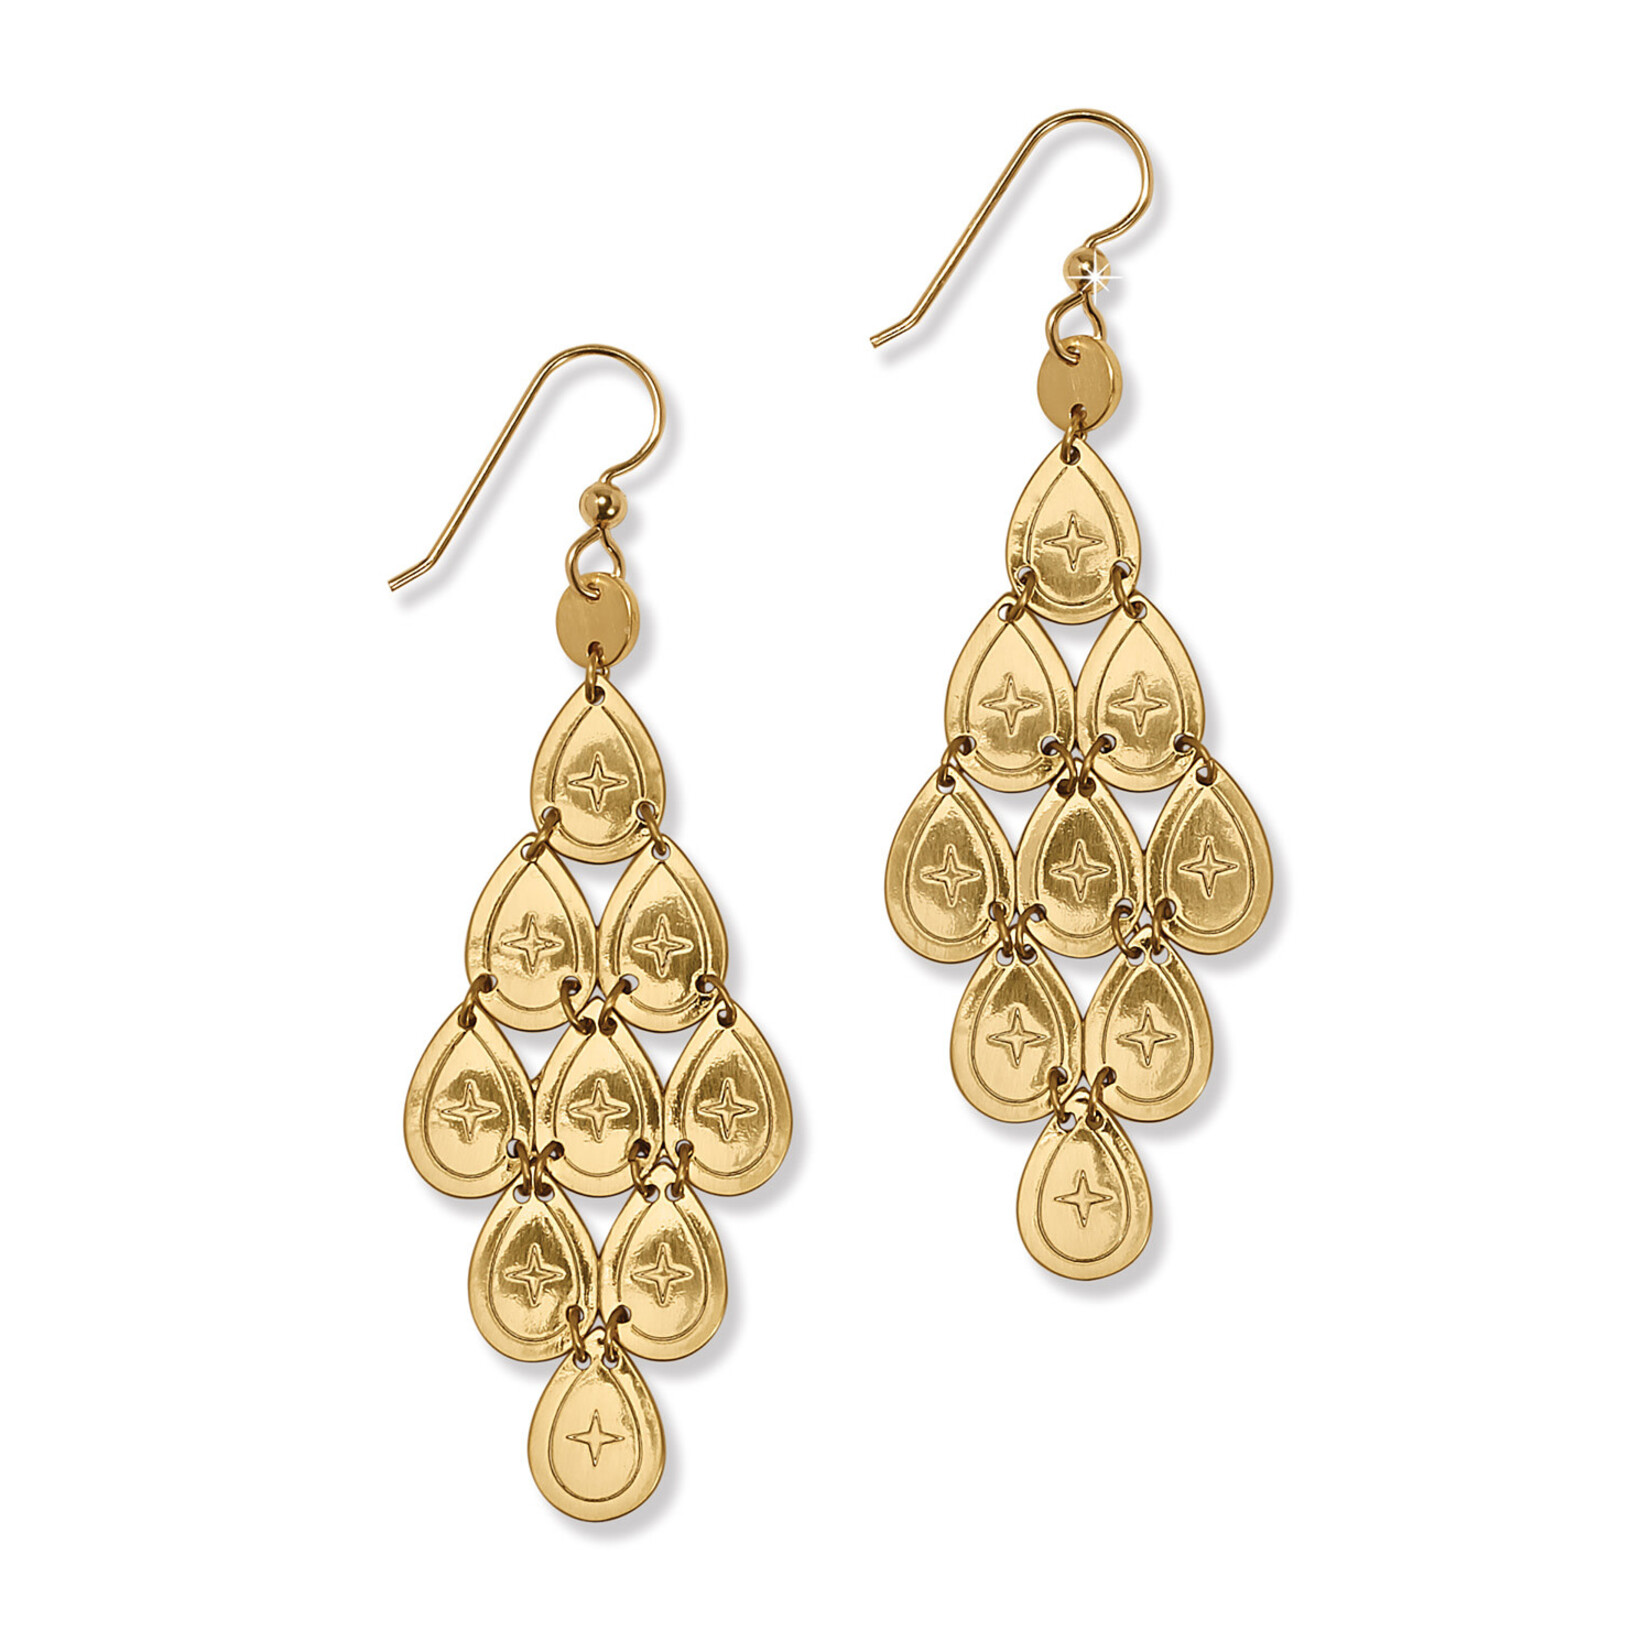 Brighton Palm Canyon Teardrop French Wire Earrings - Gold